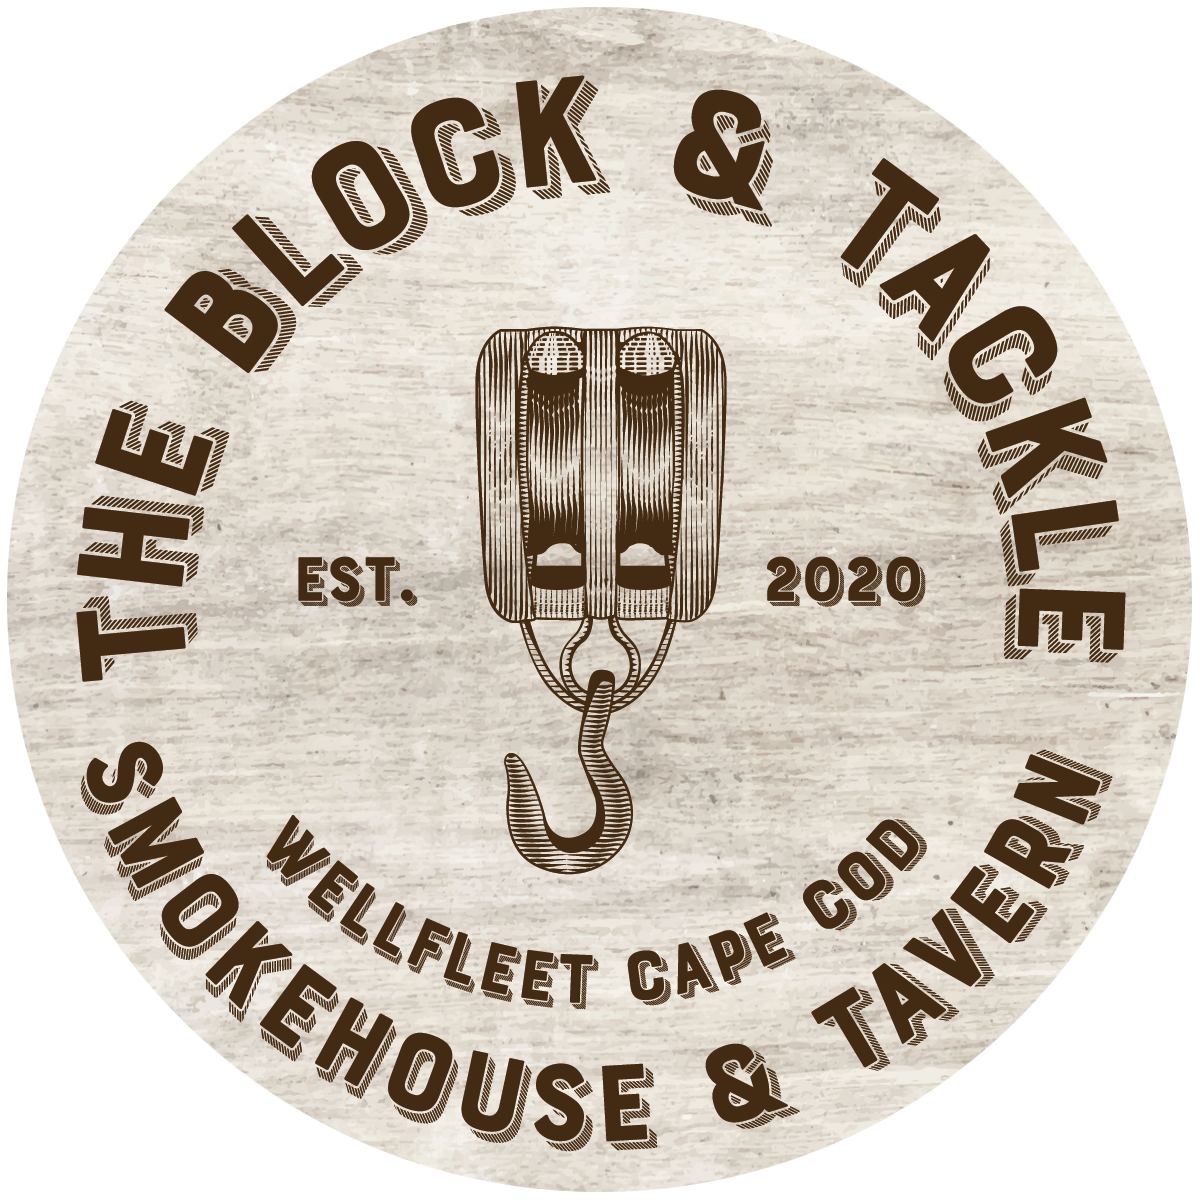 THE BLOCK &amp; TACKLE